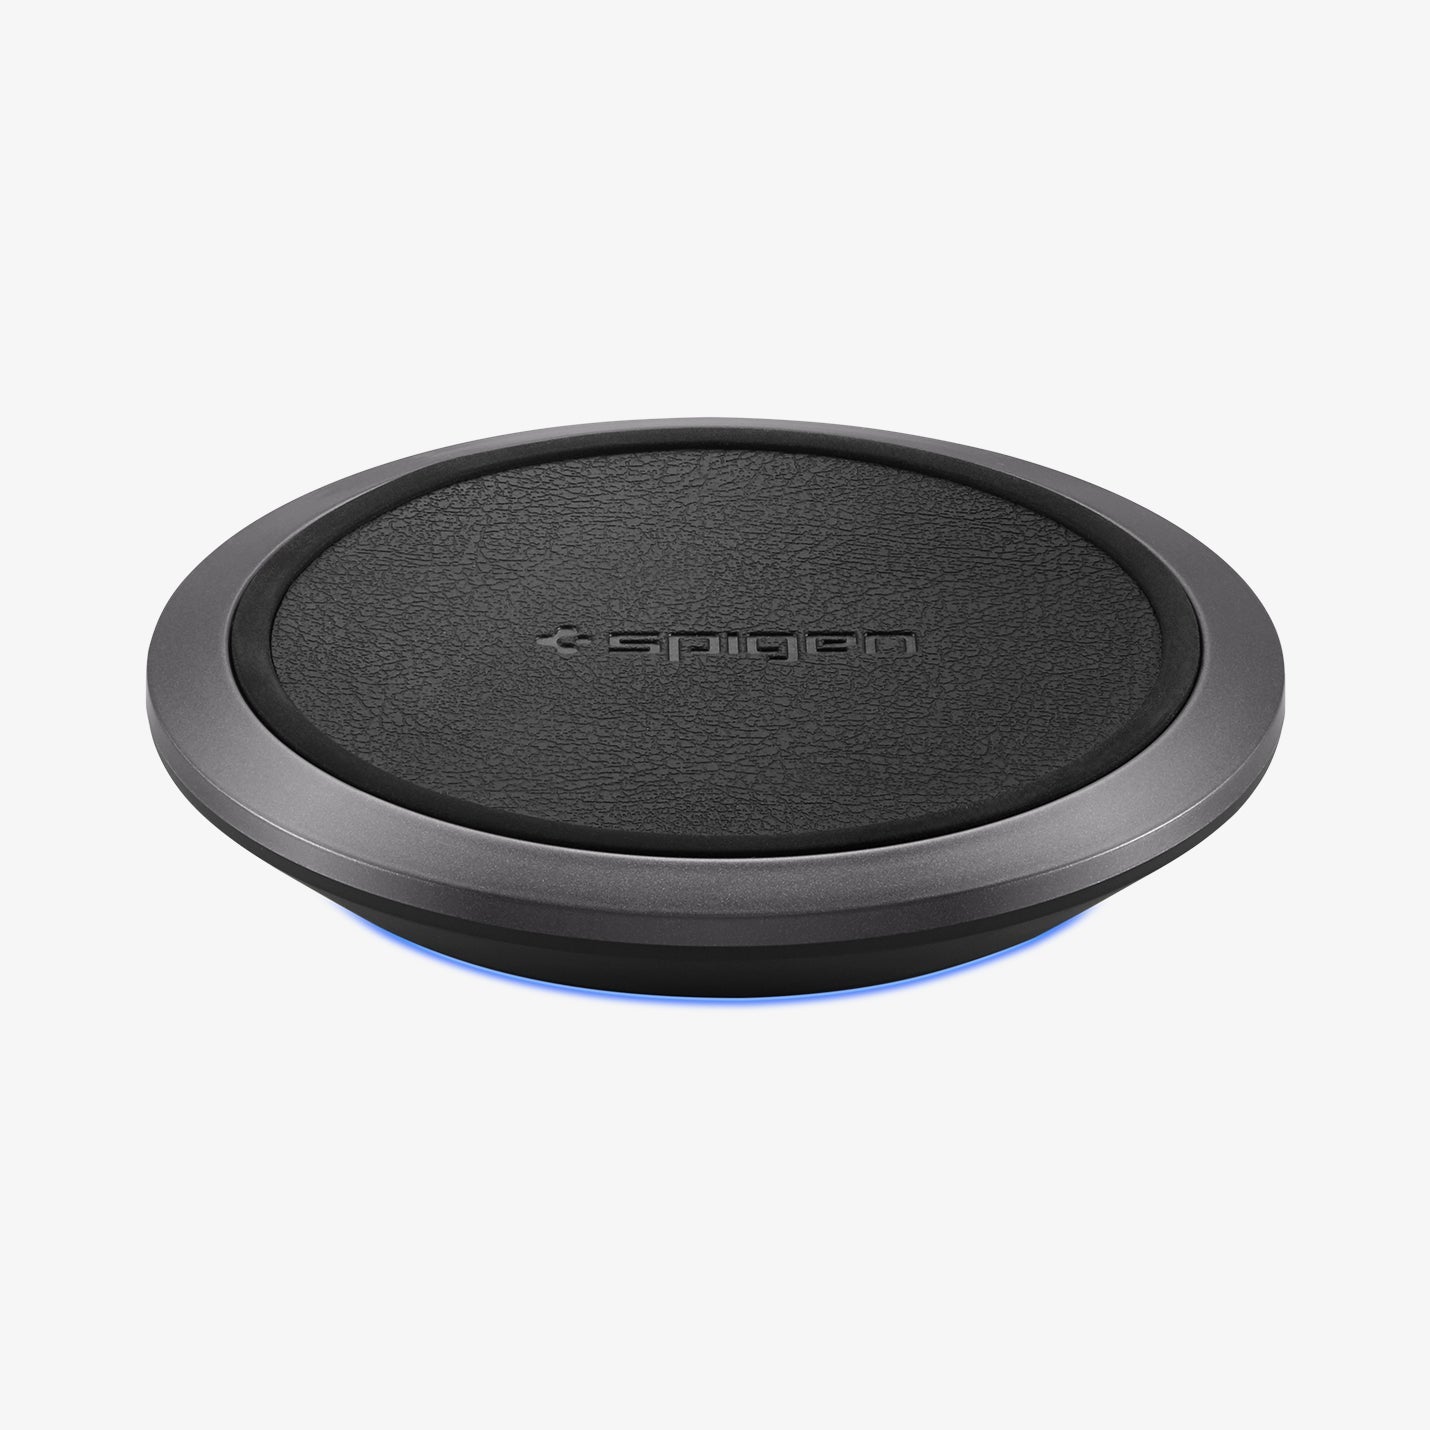 000CH23122 - Essential® Leather Designed 10W Wireless Charger F308W in black showing the top and front with blue light underneath